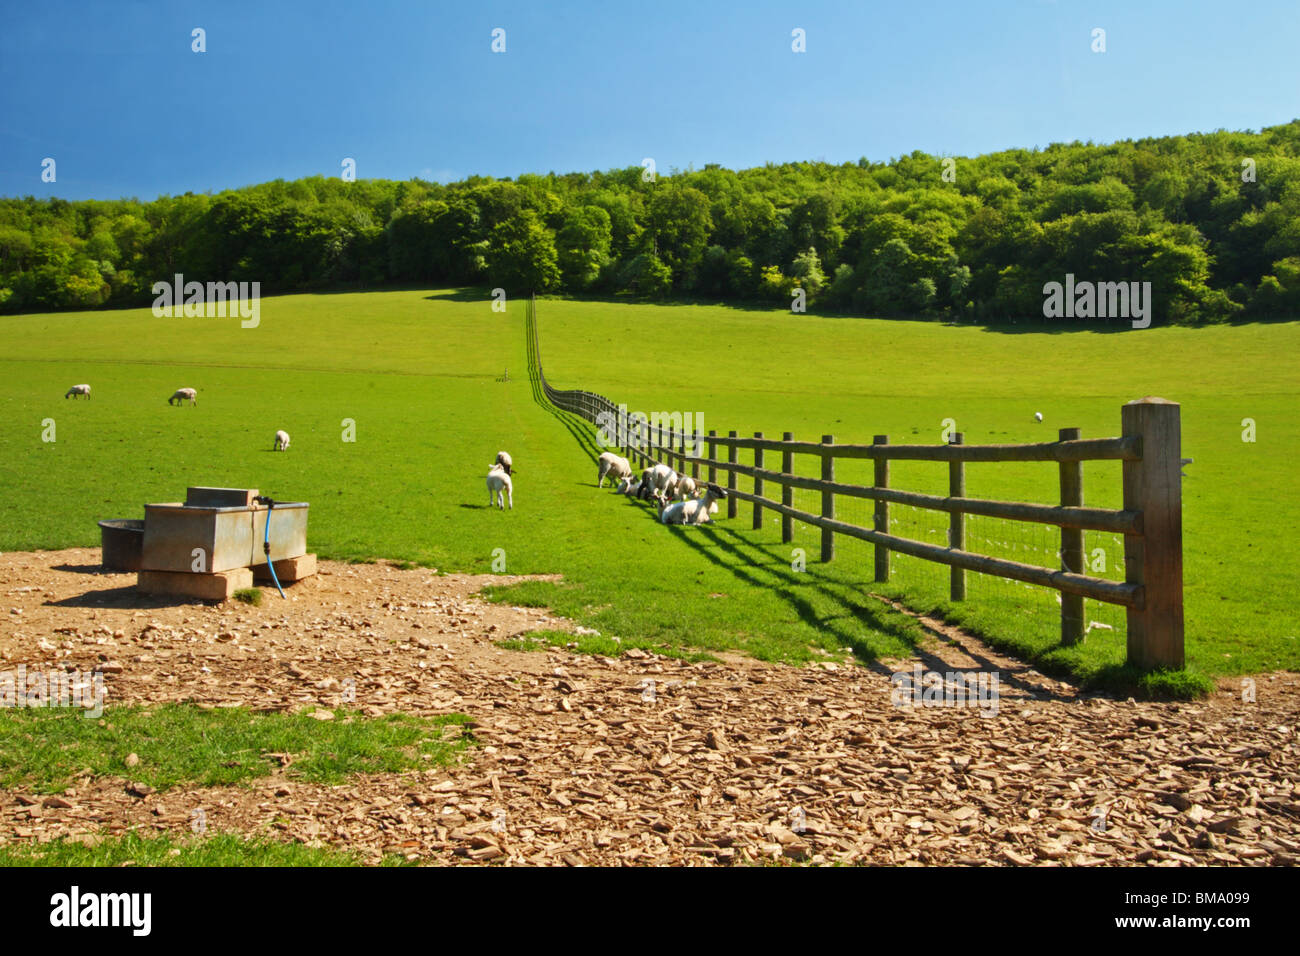 A field of sheep alongside Chequers Lane, Leading to Fingest, The Chilterns, Buckinghamshire, United Kingdom. Stock Photo